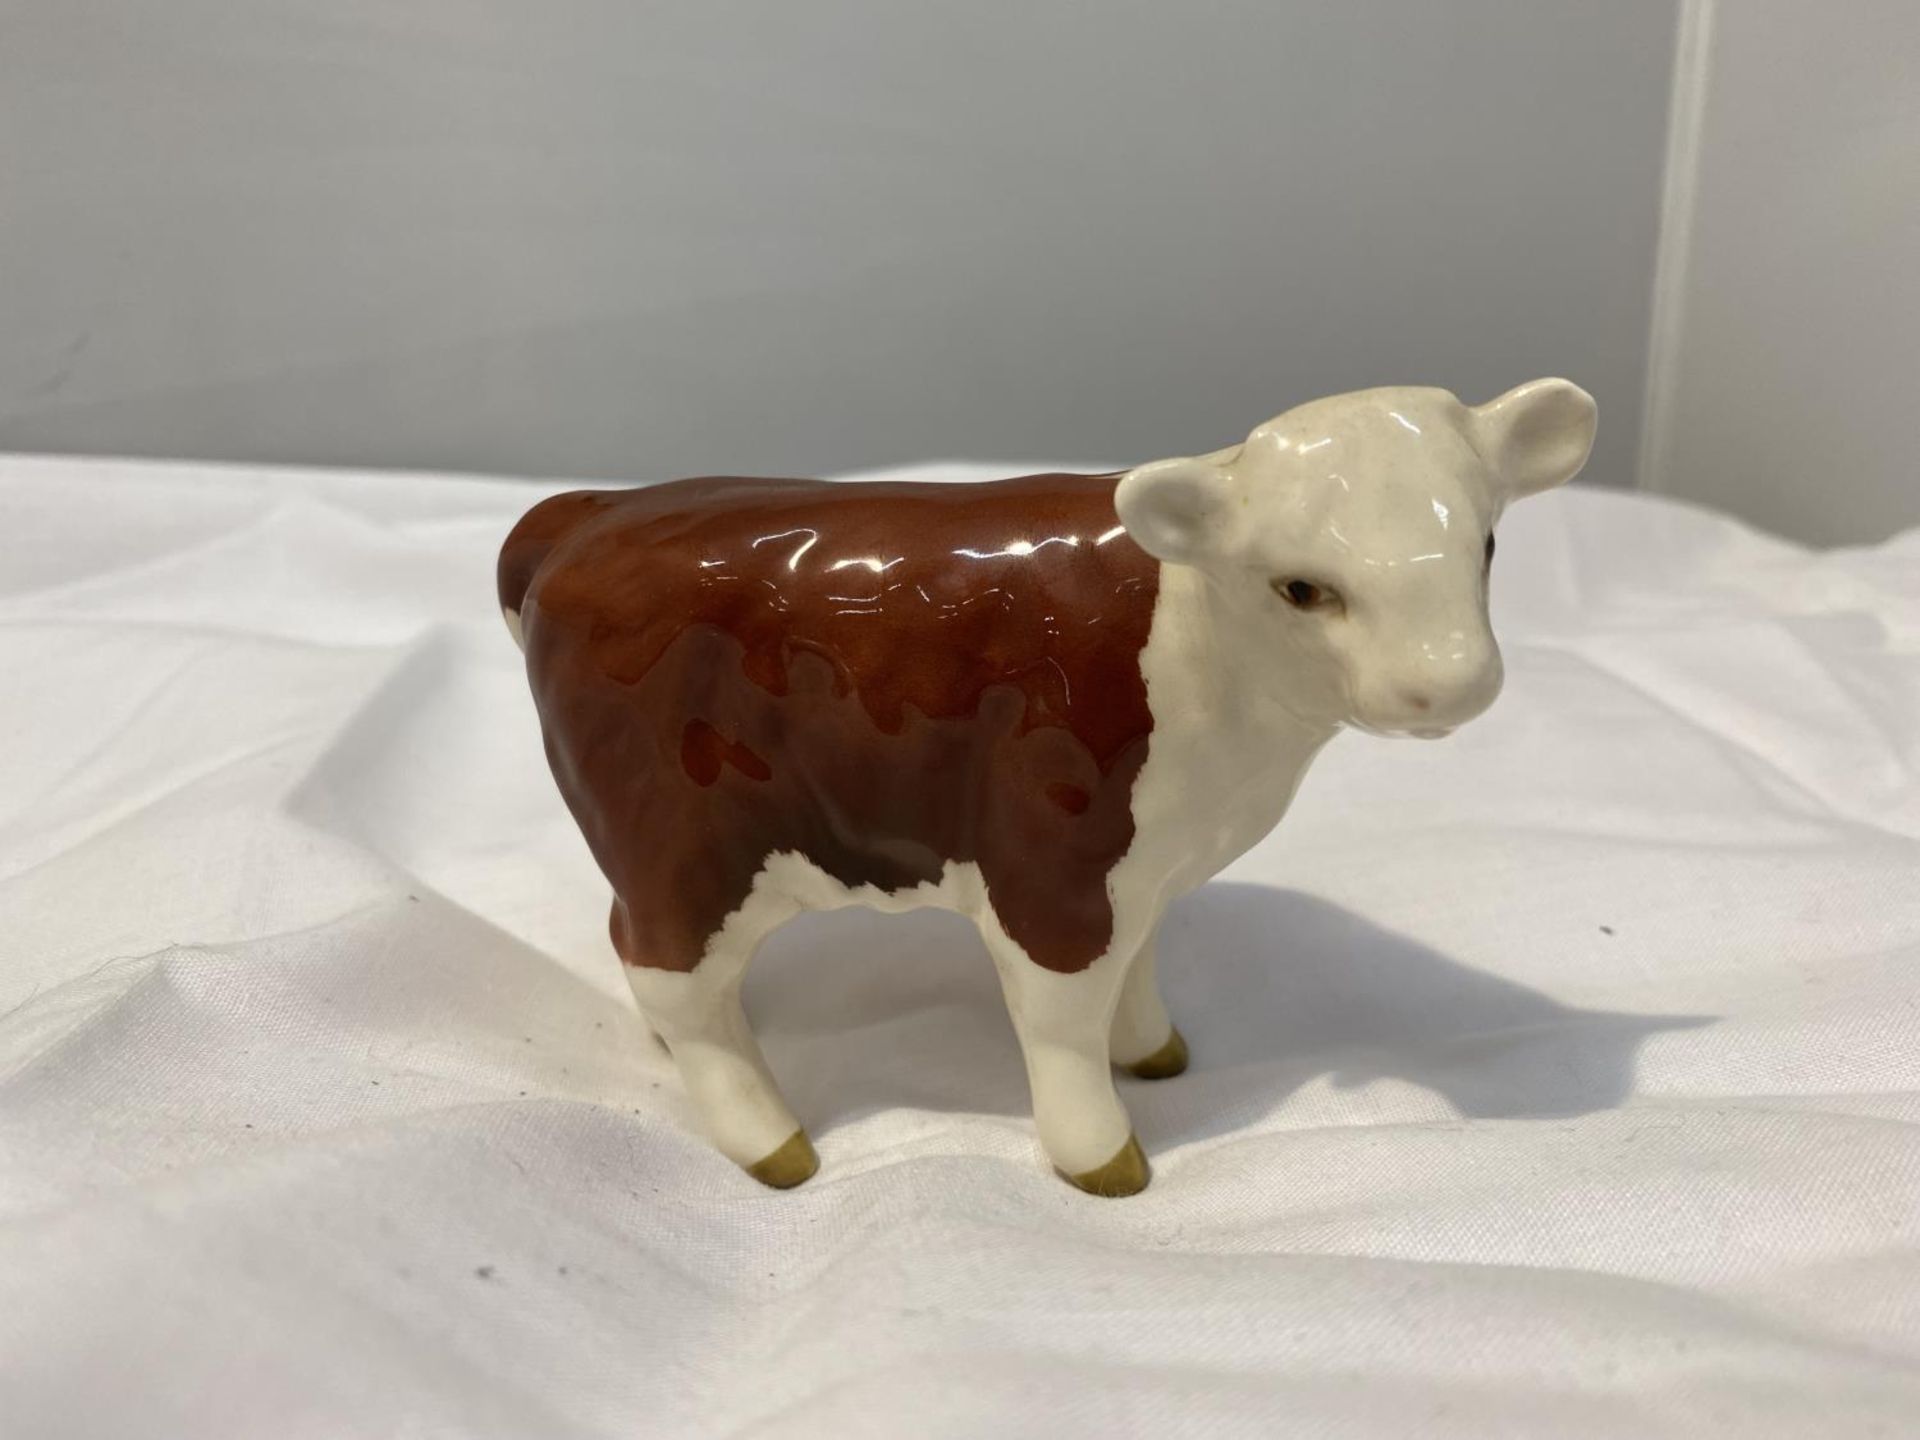 TWO BESWICK FIGURES, A HEREFORD COW AND A CALF - Image 6 of 8